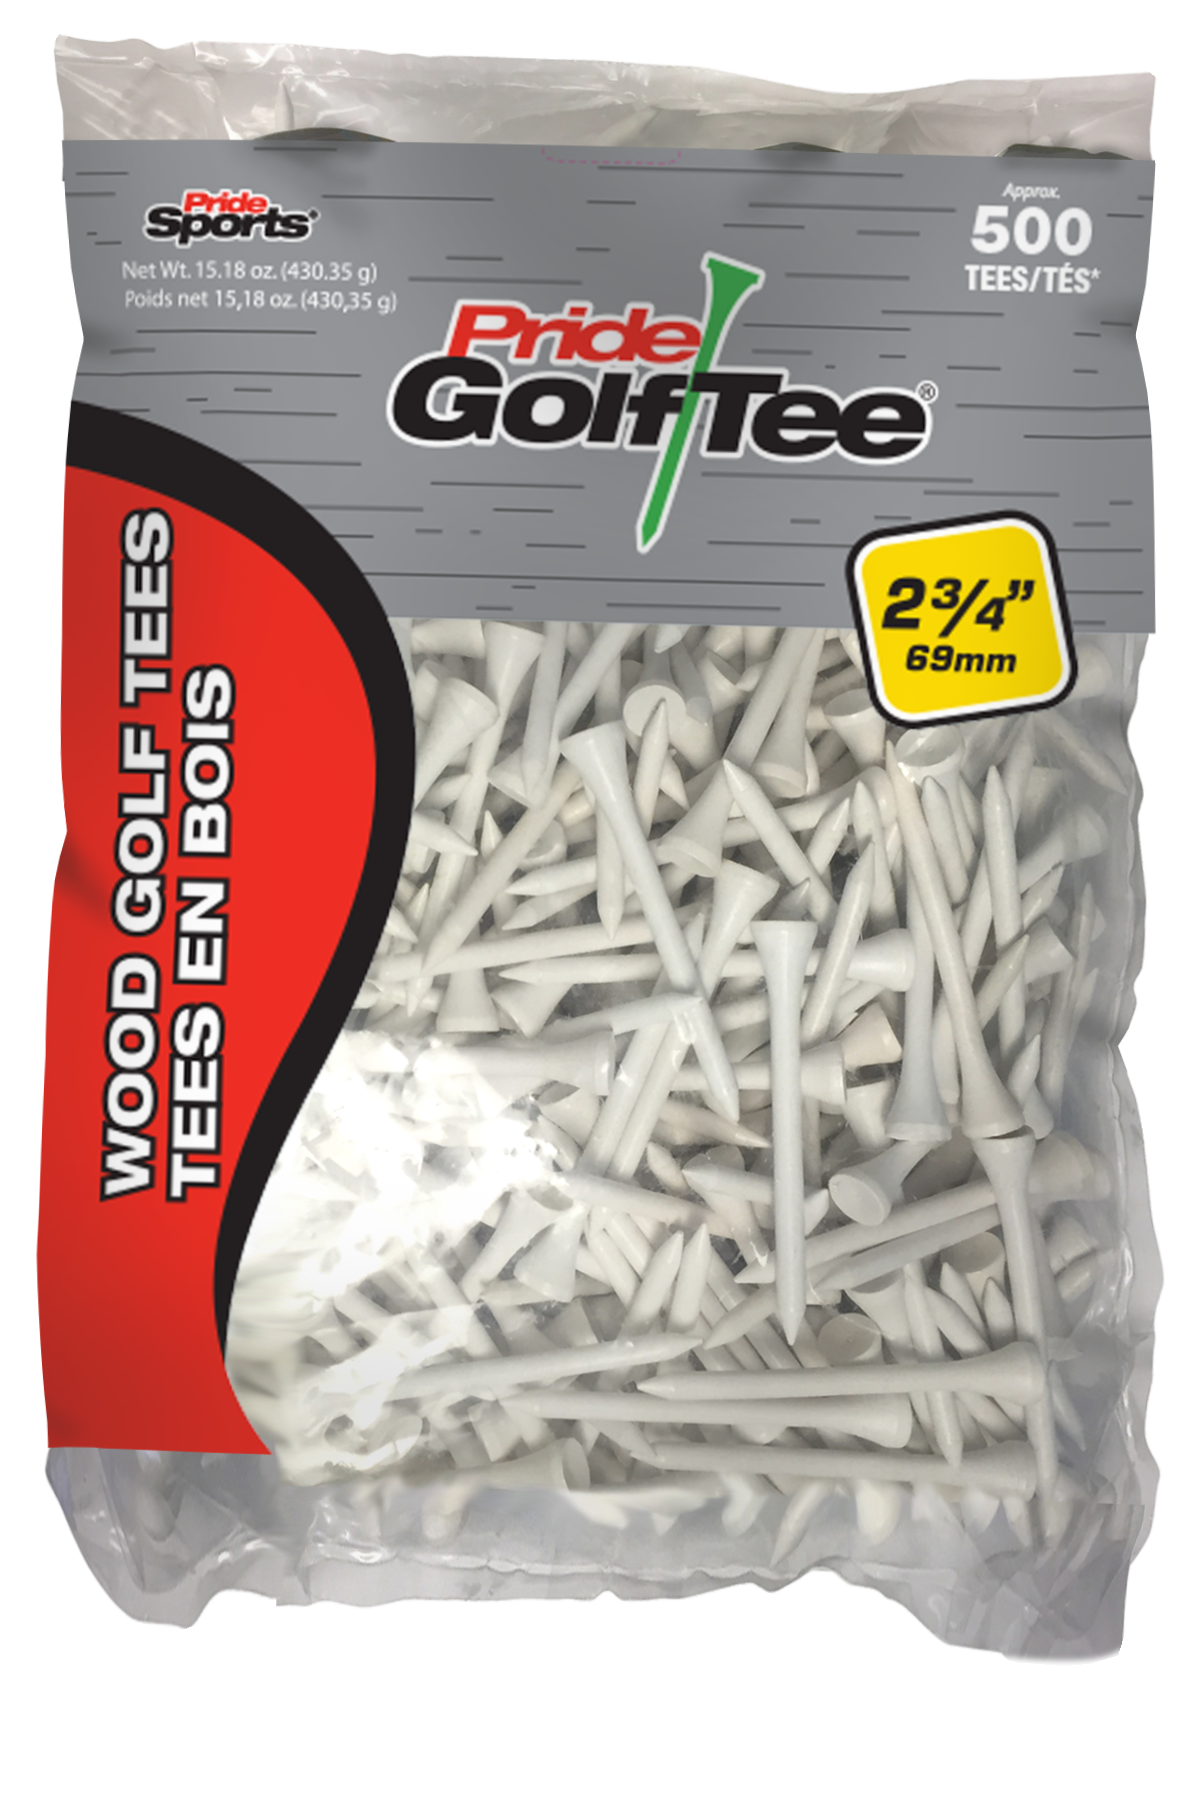 Pride Wood Golf Tee, 2-3/4 inch, White, 500 Count - image 1 of 8